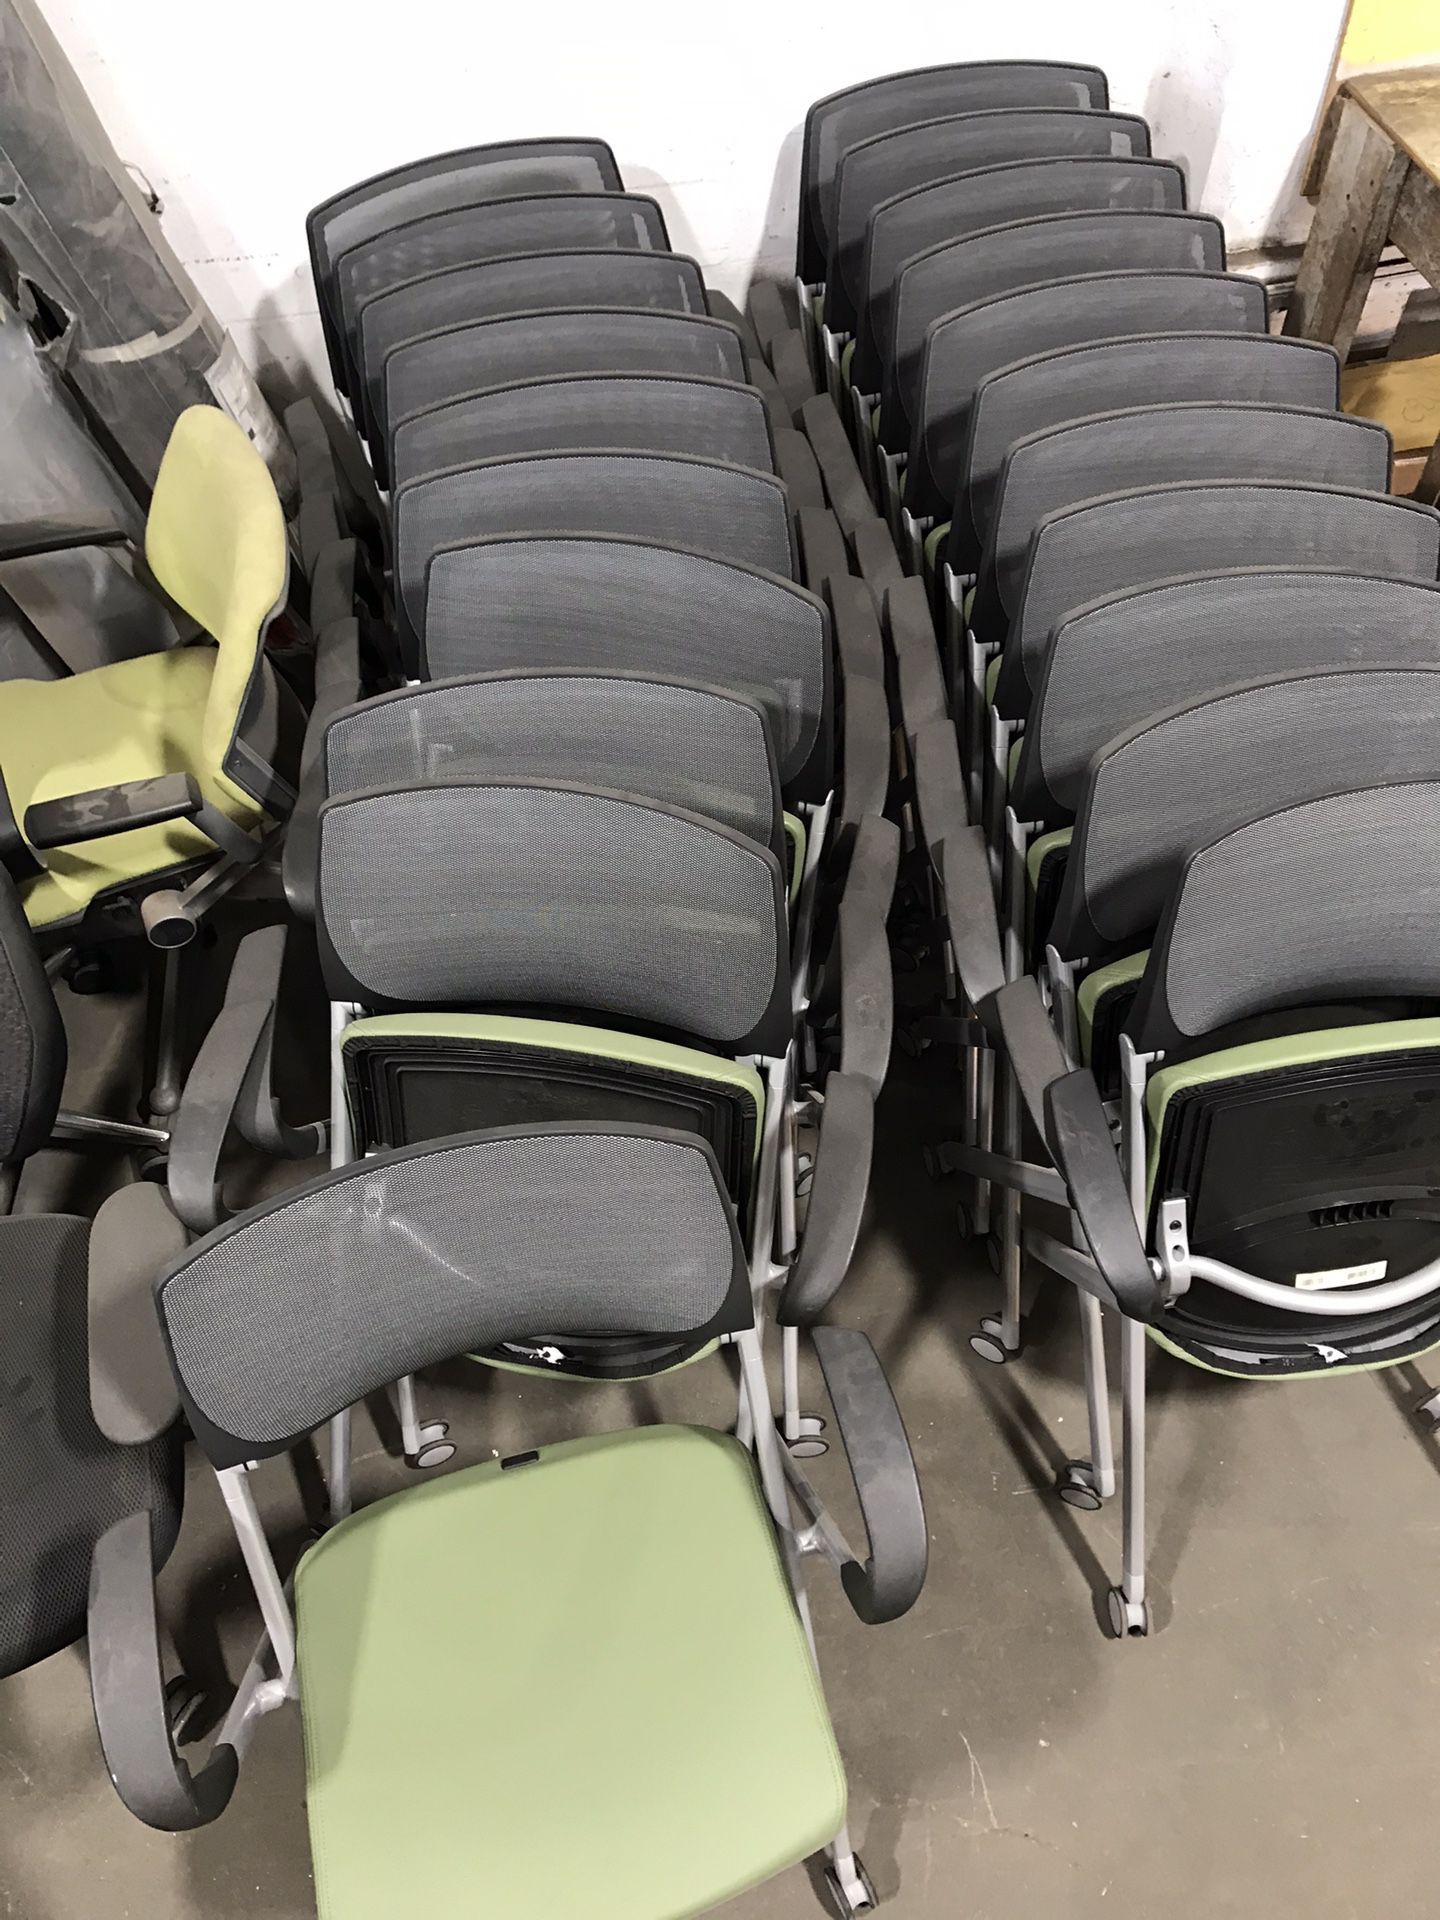 Office Chairs For Sale $125 Each- Excellent Condition (Tampa)